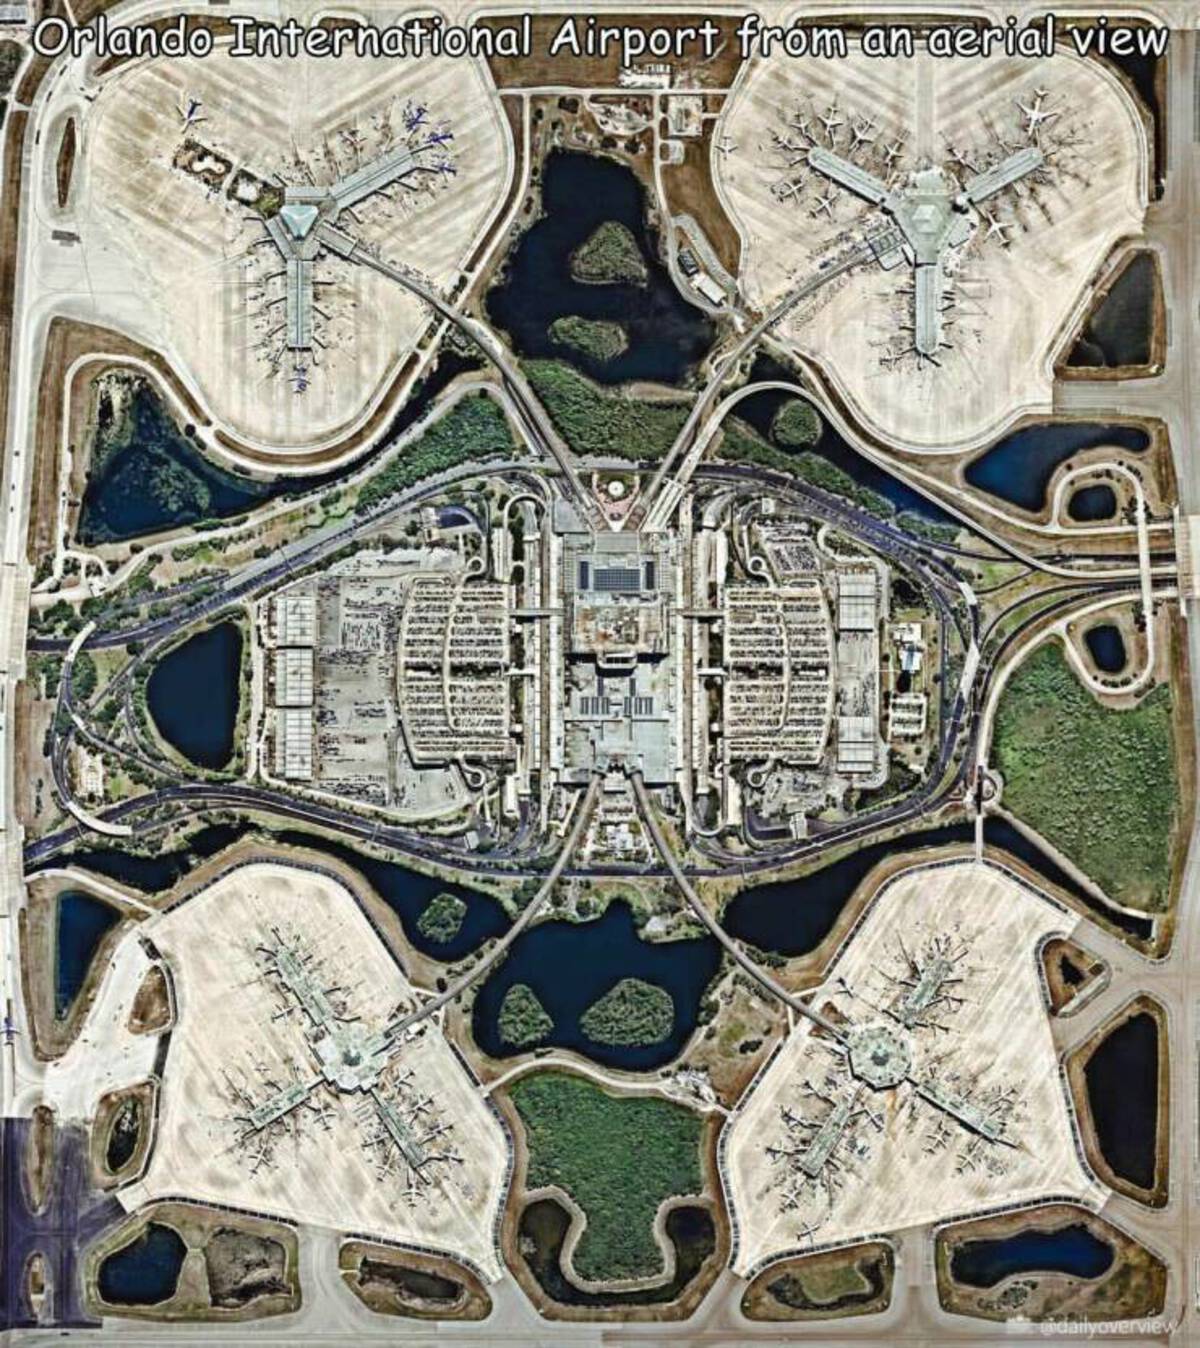 map - Orlando International Airport from an aerial view Acture 200 gidailyoverview